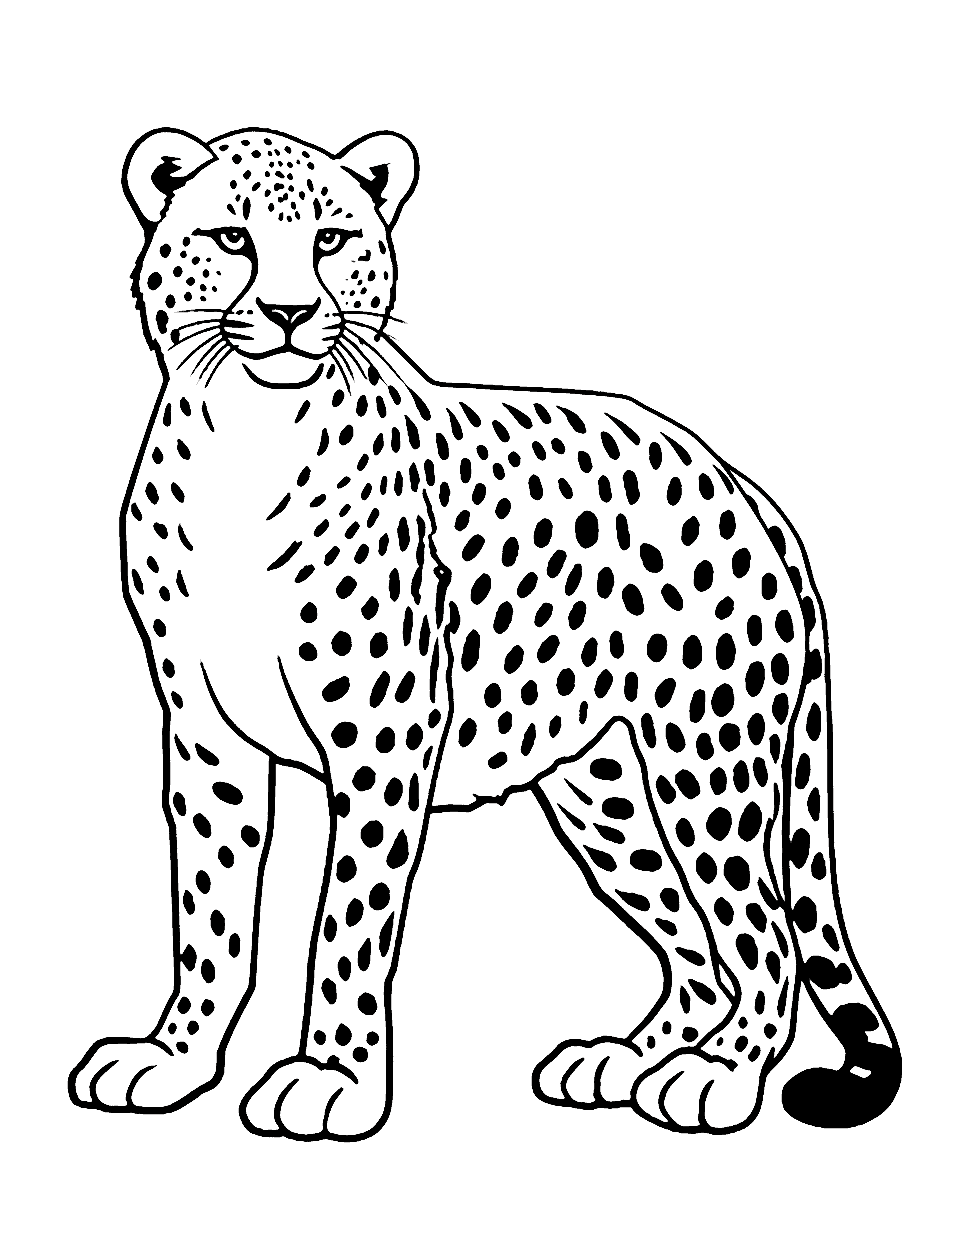 Easy Outline of a Cheetah Coloring Page - A simple outline of a cheetah for easy coloring.